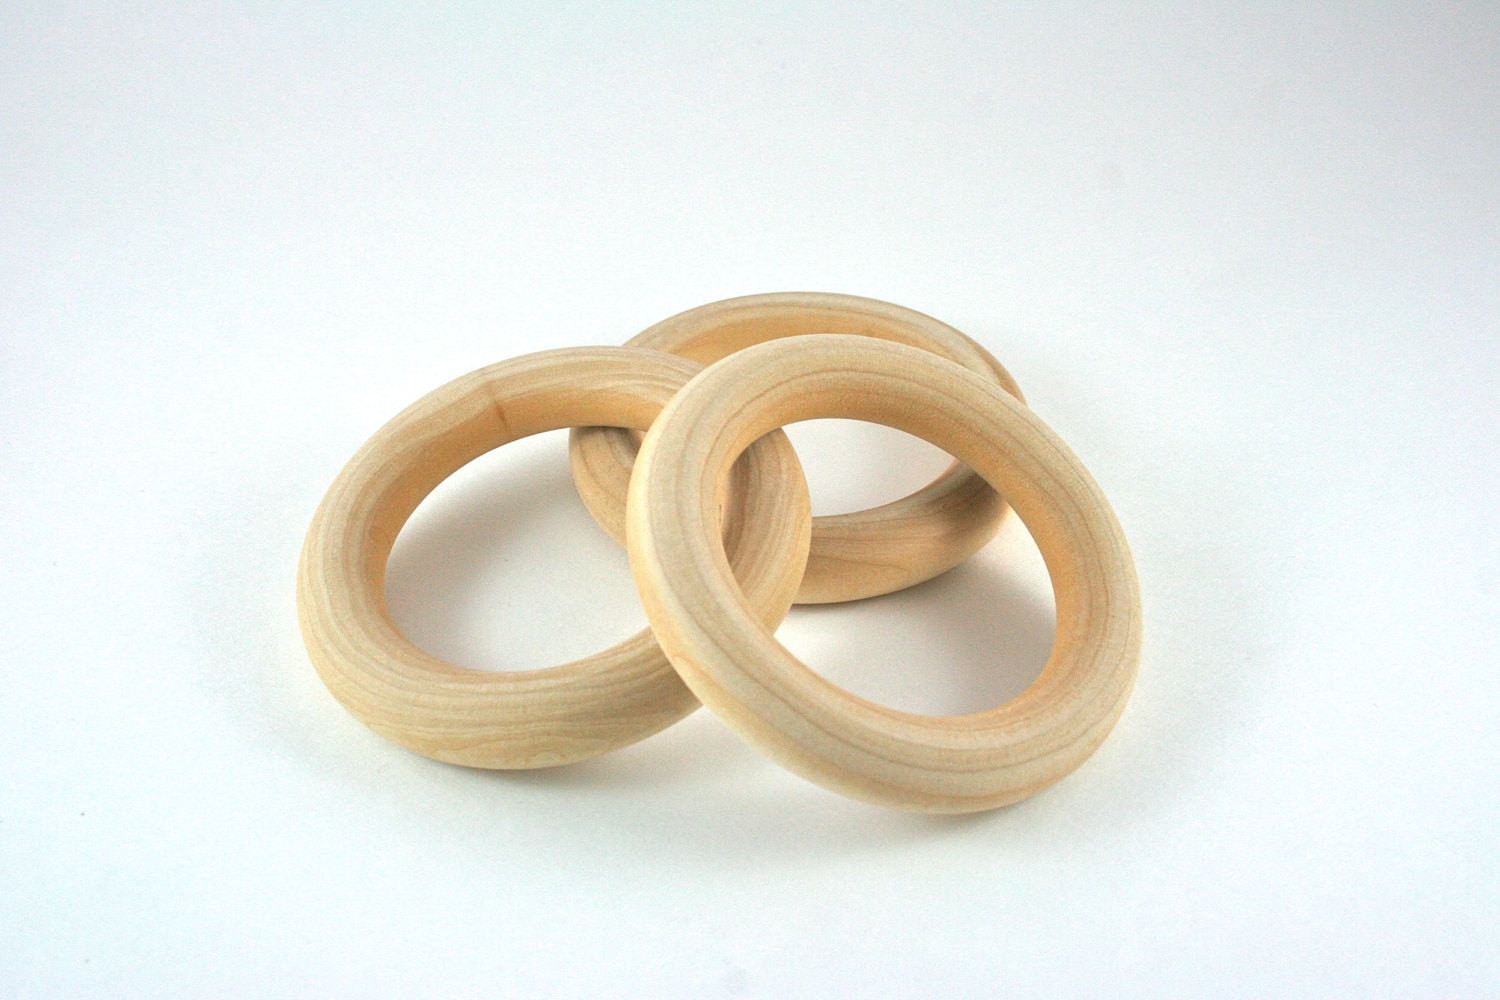 DIY Wooden Ring
 3 Wood Rings 3 inch Unfinished Wooden Rings DIY